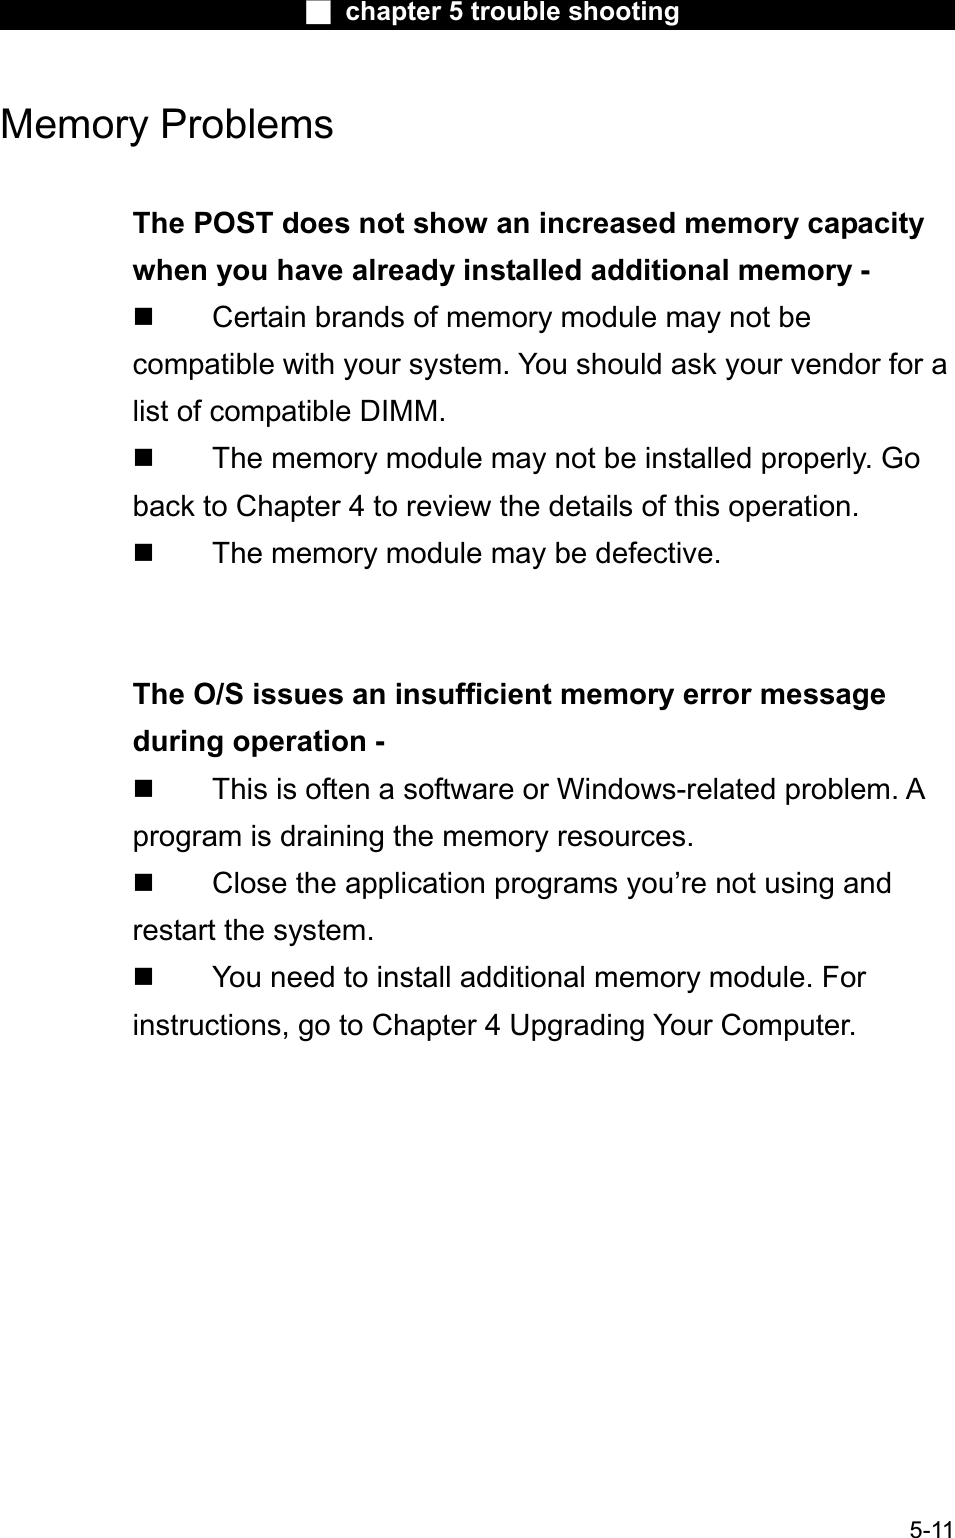 Ϯ chapter 5 trouble shootingMemory Problems The POST does not show an increased memory capacitywhen you have already installed additional memory -  Certain brands of memory module may not be compatible with your system. You should ask your vendor for a list of compatible DIMM.  The memory module may not be installed properly. Go back to Chapter 4 to review the details of this operation.  The memory module may be defective.The O/S issues an insufficient memory error message during operation -  This is often a software or Windows-related problem. Aprogram is draining the memory resources. Close the application programs you’re not using andrestart the system. You need to install additional memory module. Forinstructions, go to Chapter 4 Upgrading Your Computer.5-11